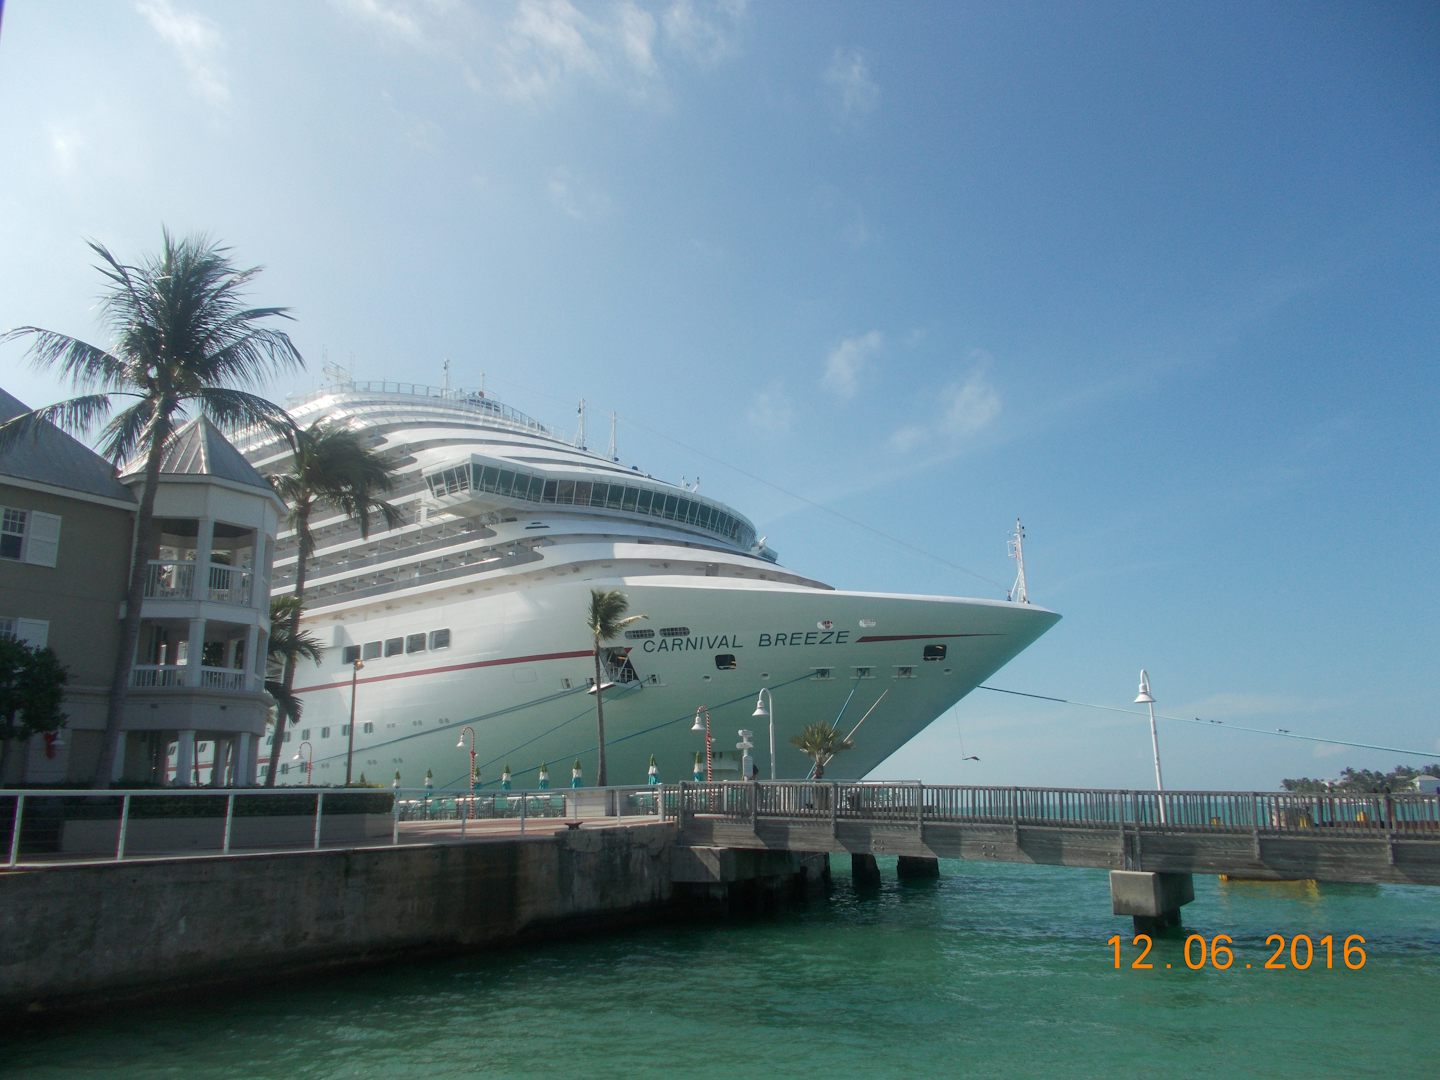 The Carnival Breeze docked at Key West, FL